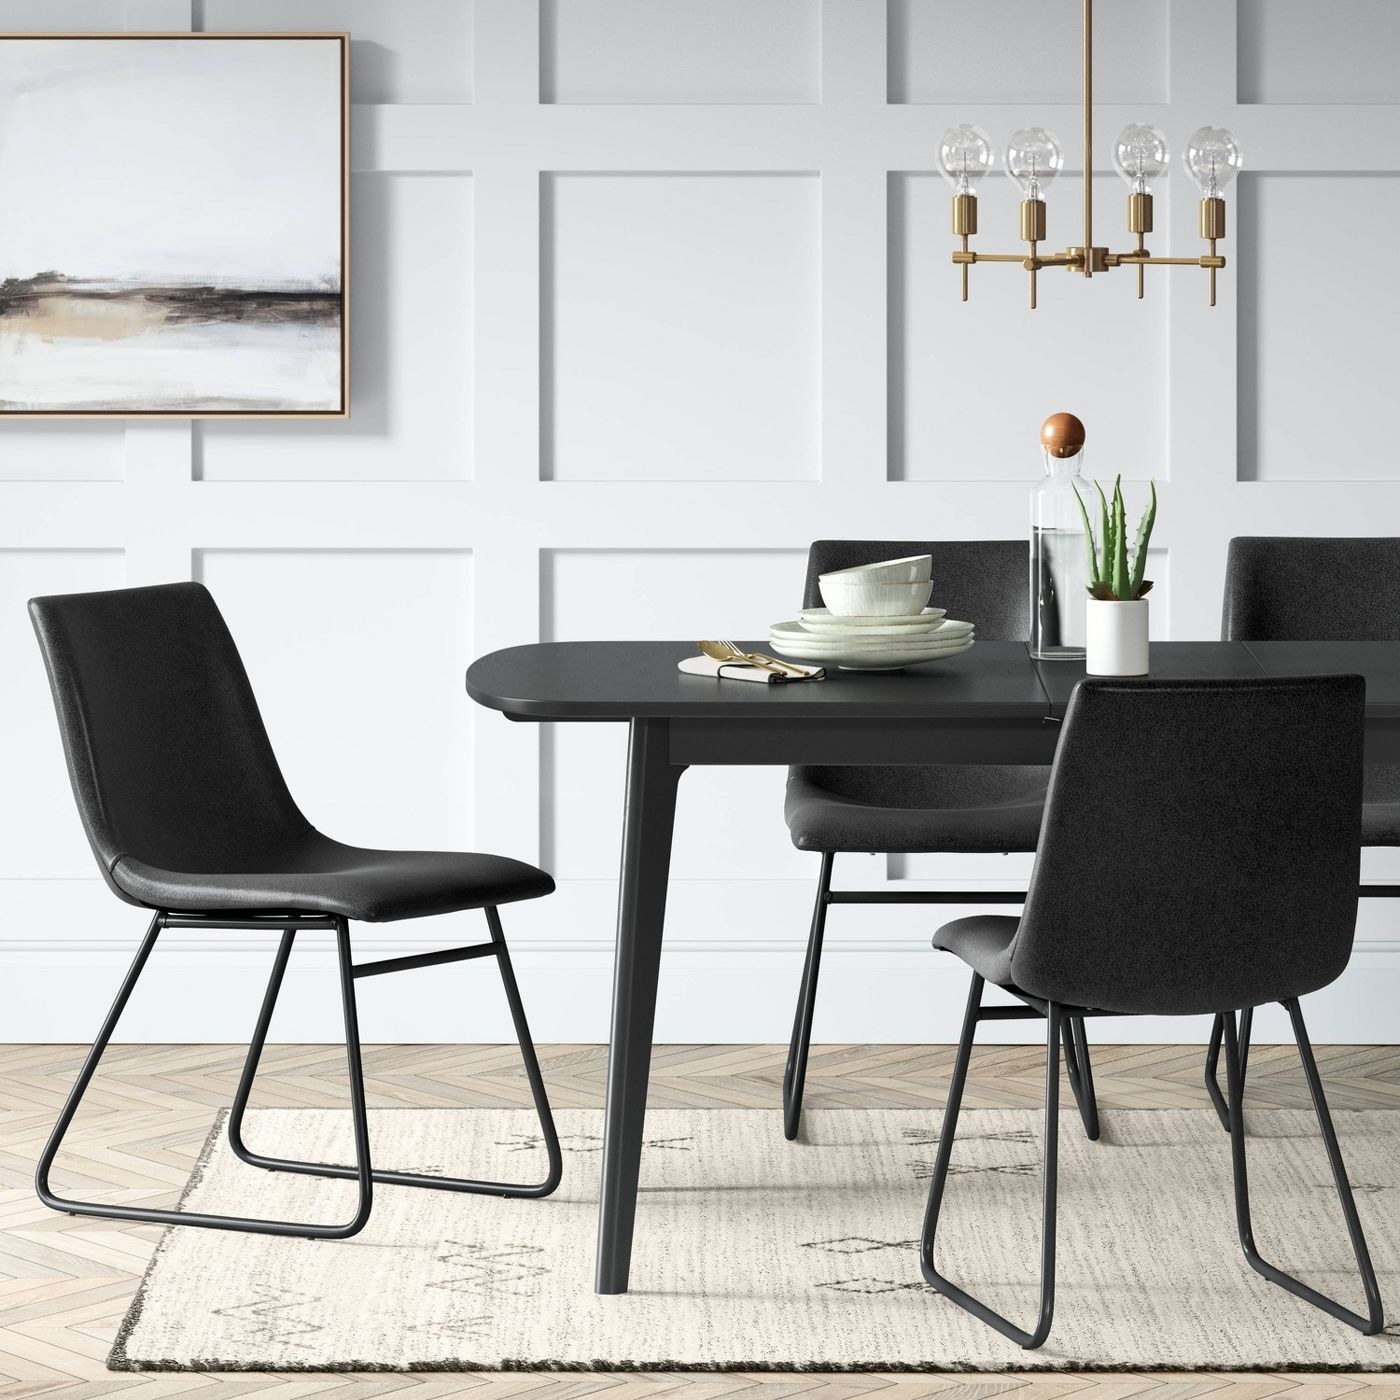 Black faux leather chairs as a black table